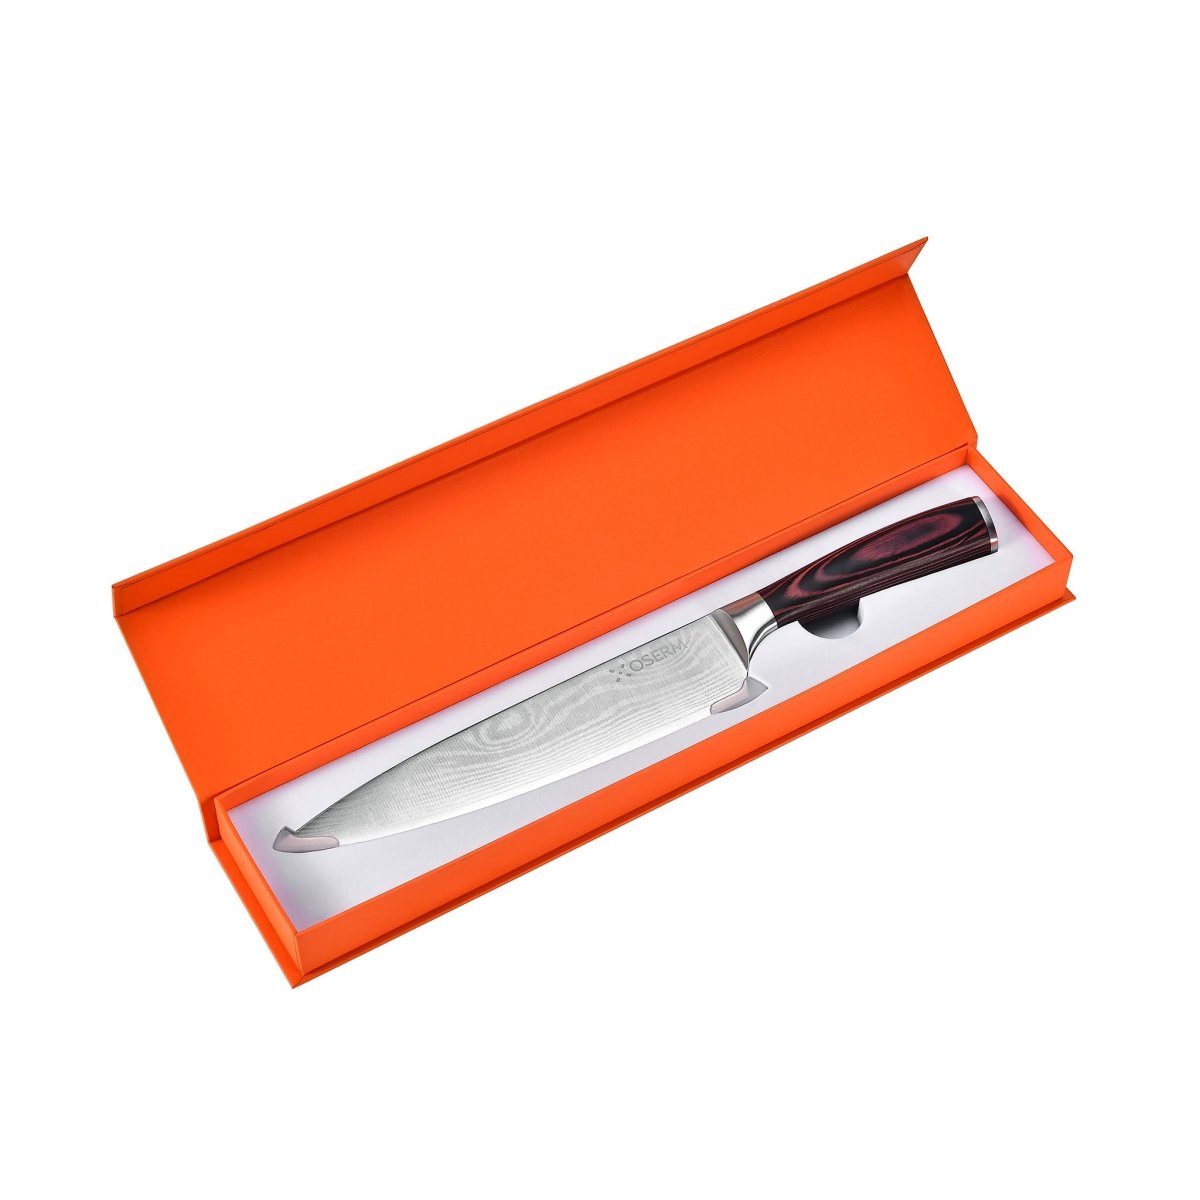 3-Pack - 8-Inch OSERM Chef's Knives